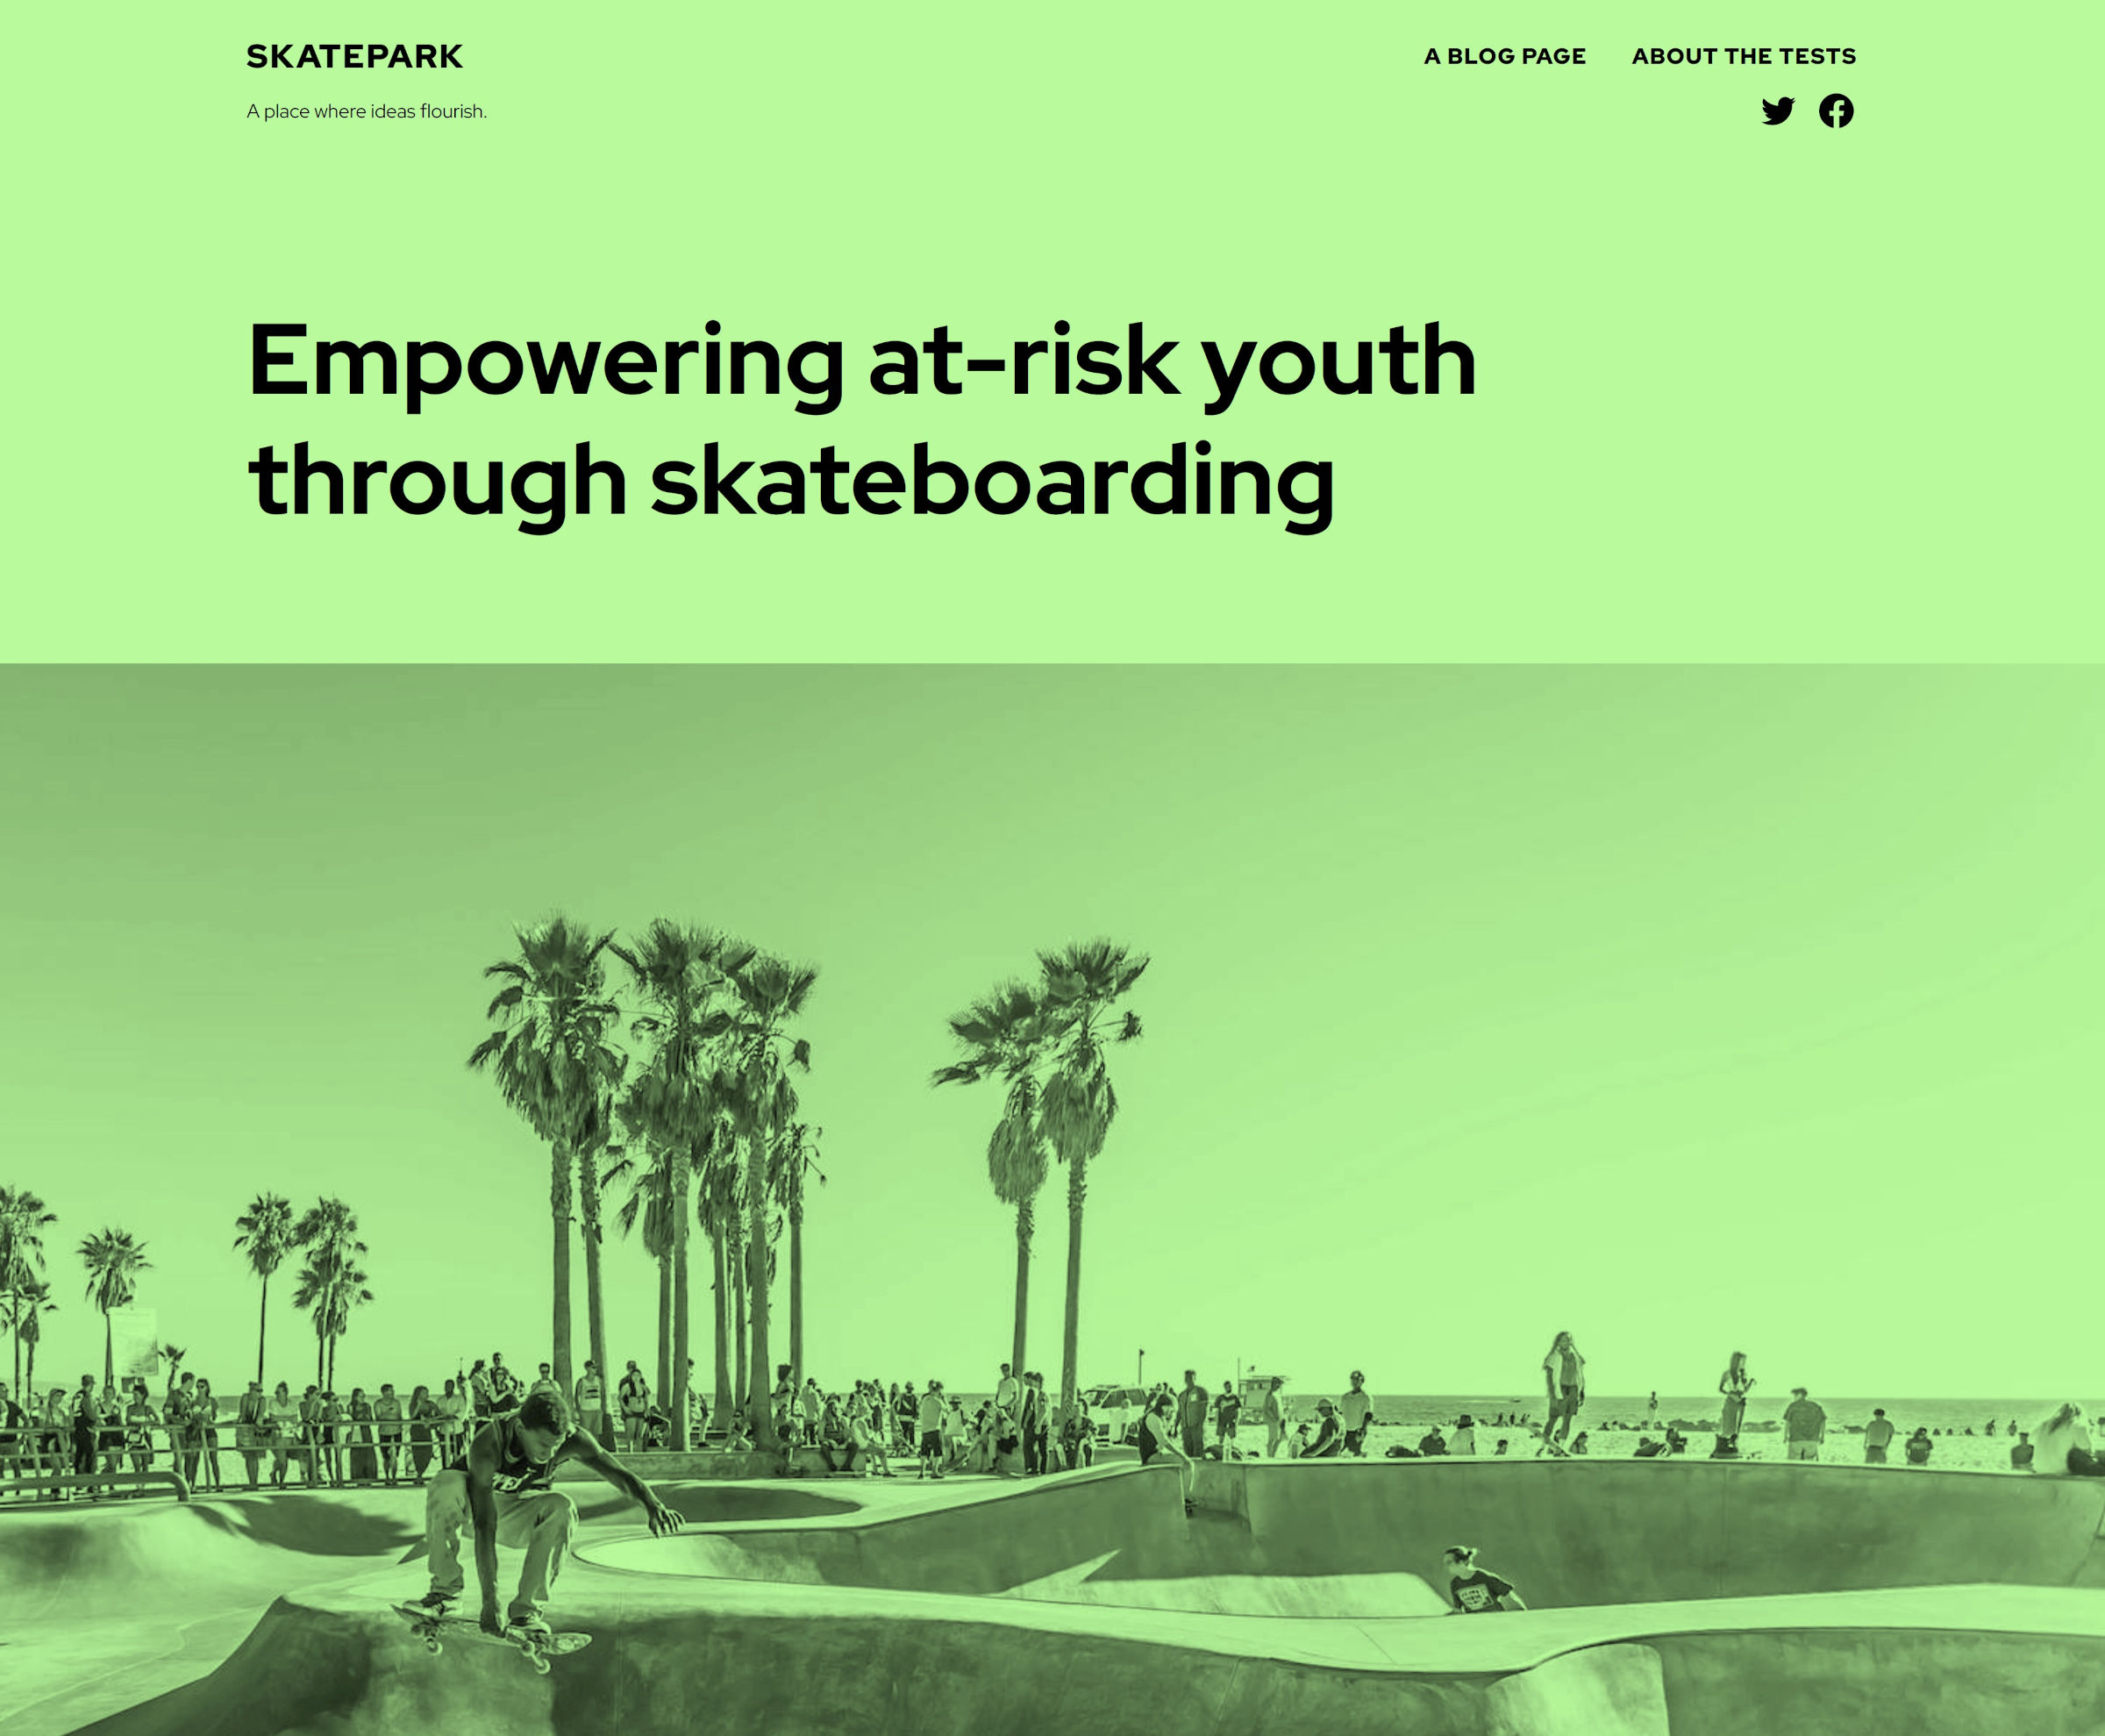 skatepark Skatepark Is a Bold and Vibrant Block Theme for Events and Organizations design tips 